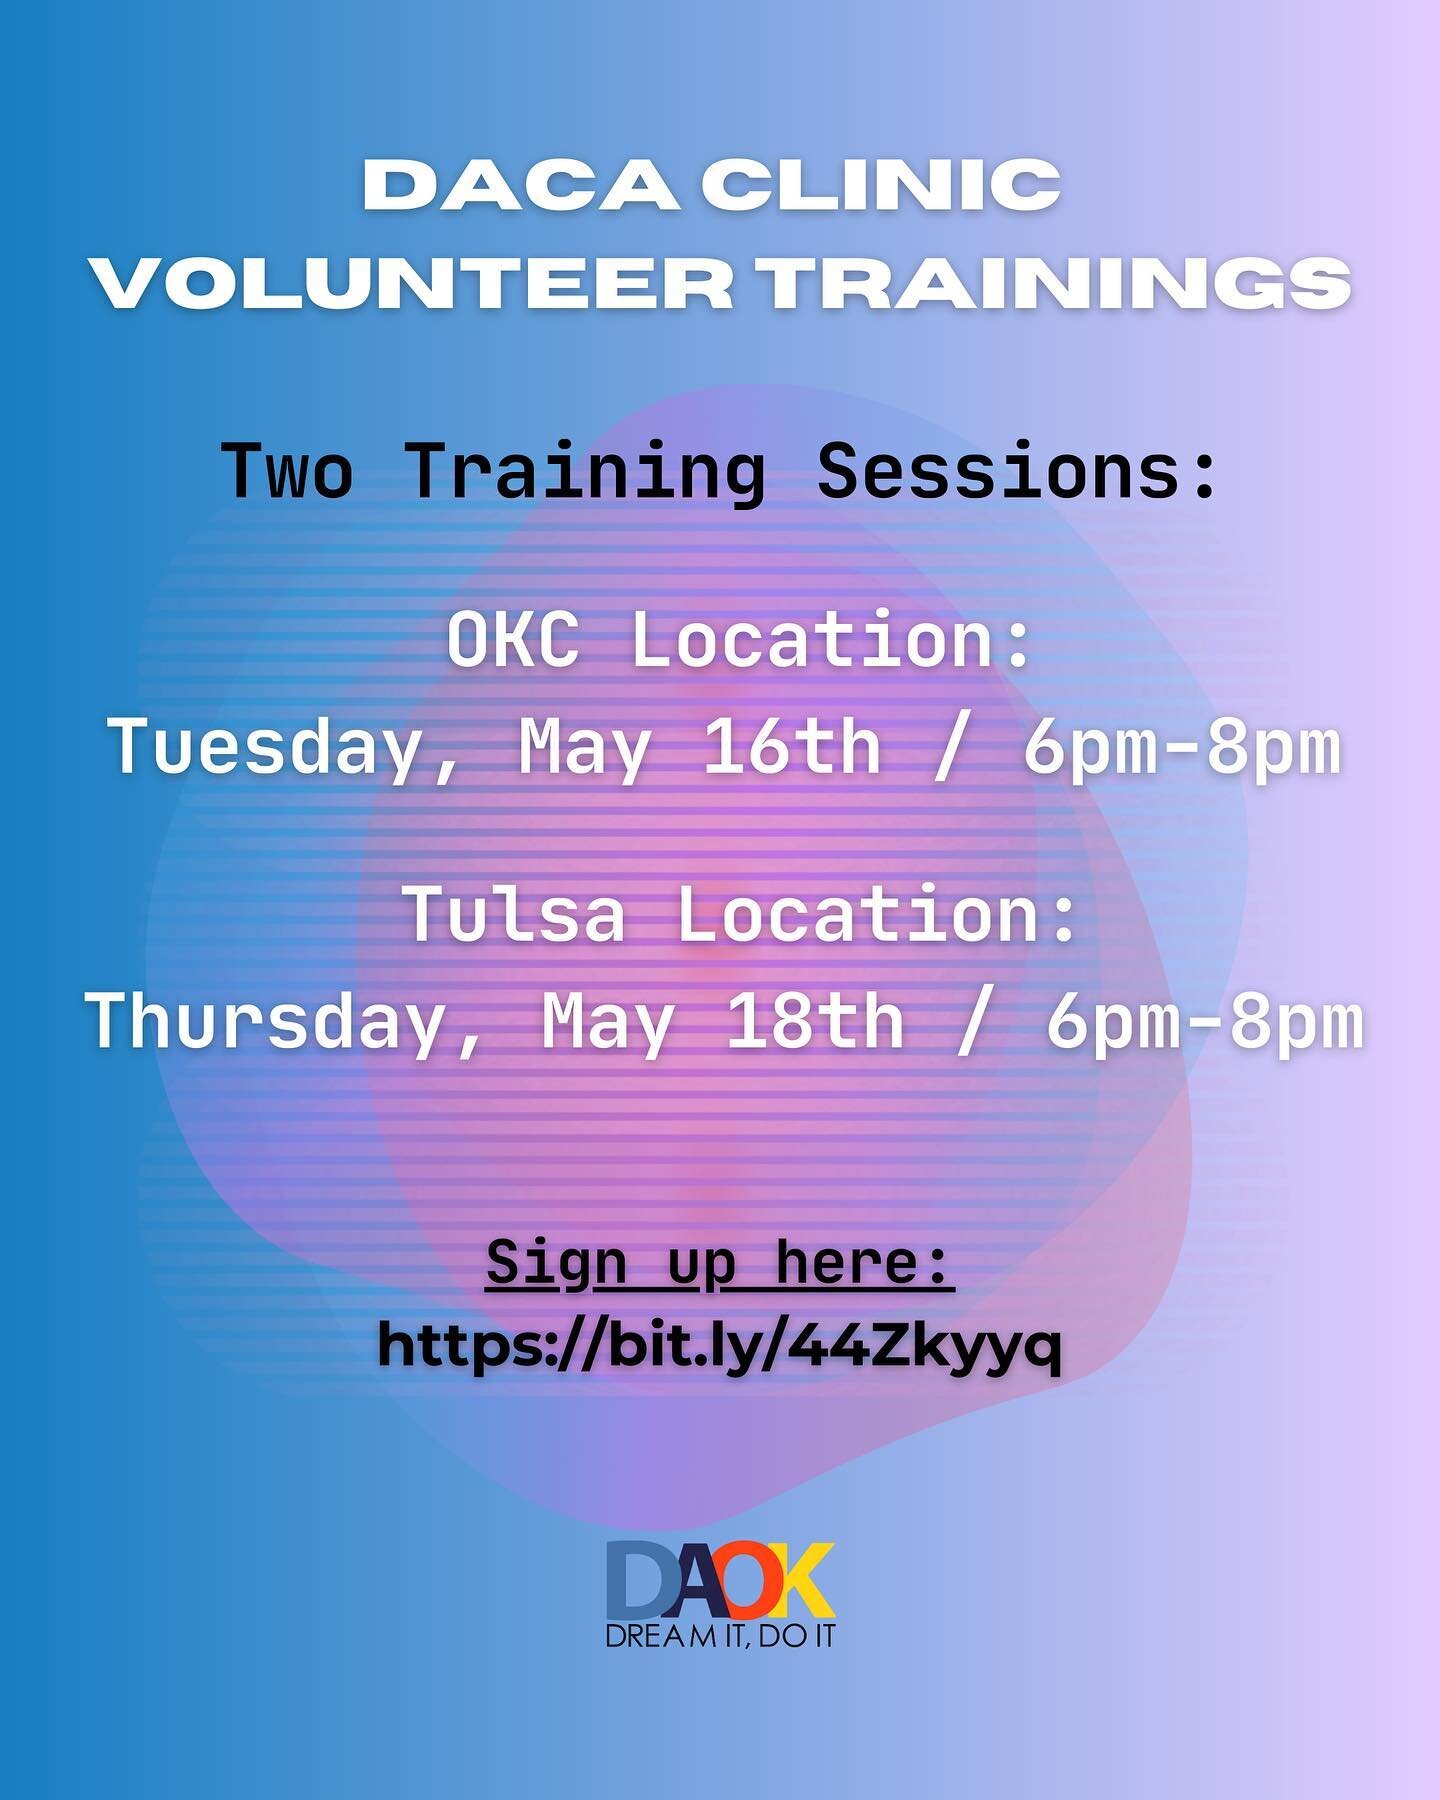 Hi friends! We're excited to announce that we'll be resuming our in-person DACA clinics this month. 💫 To ensure a smooth transition, we're seeking volunteers to support community at our clinics. This week, we have two training sessions lined up. Sig